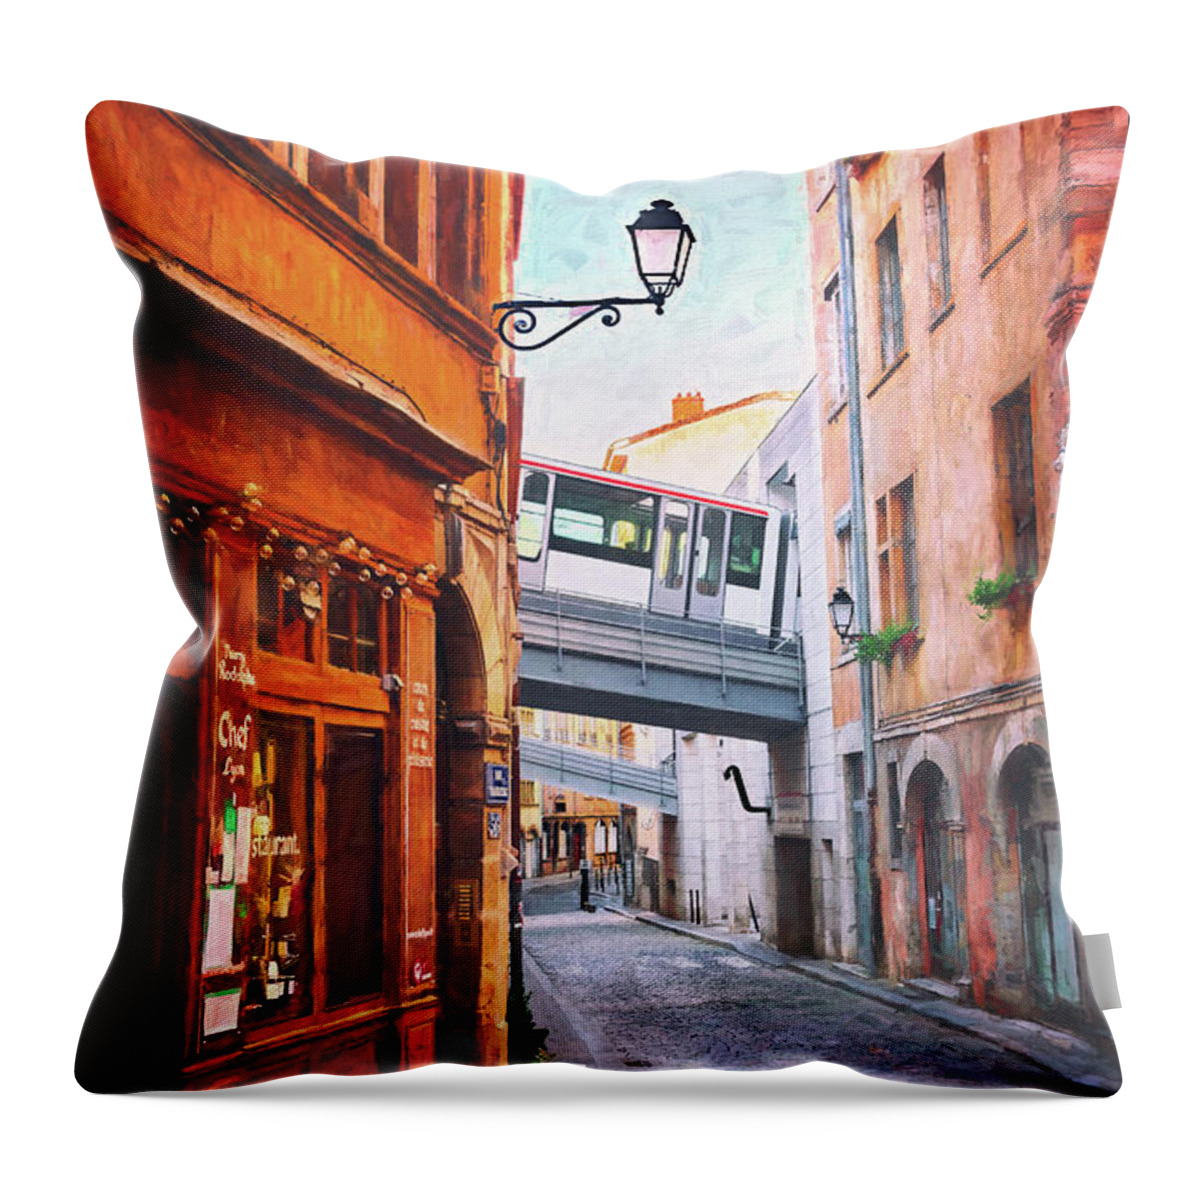 Lyon Throw Pillow featuring the photograph Street Scenes of Vieux Lyon France by Carol Japp